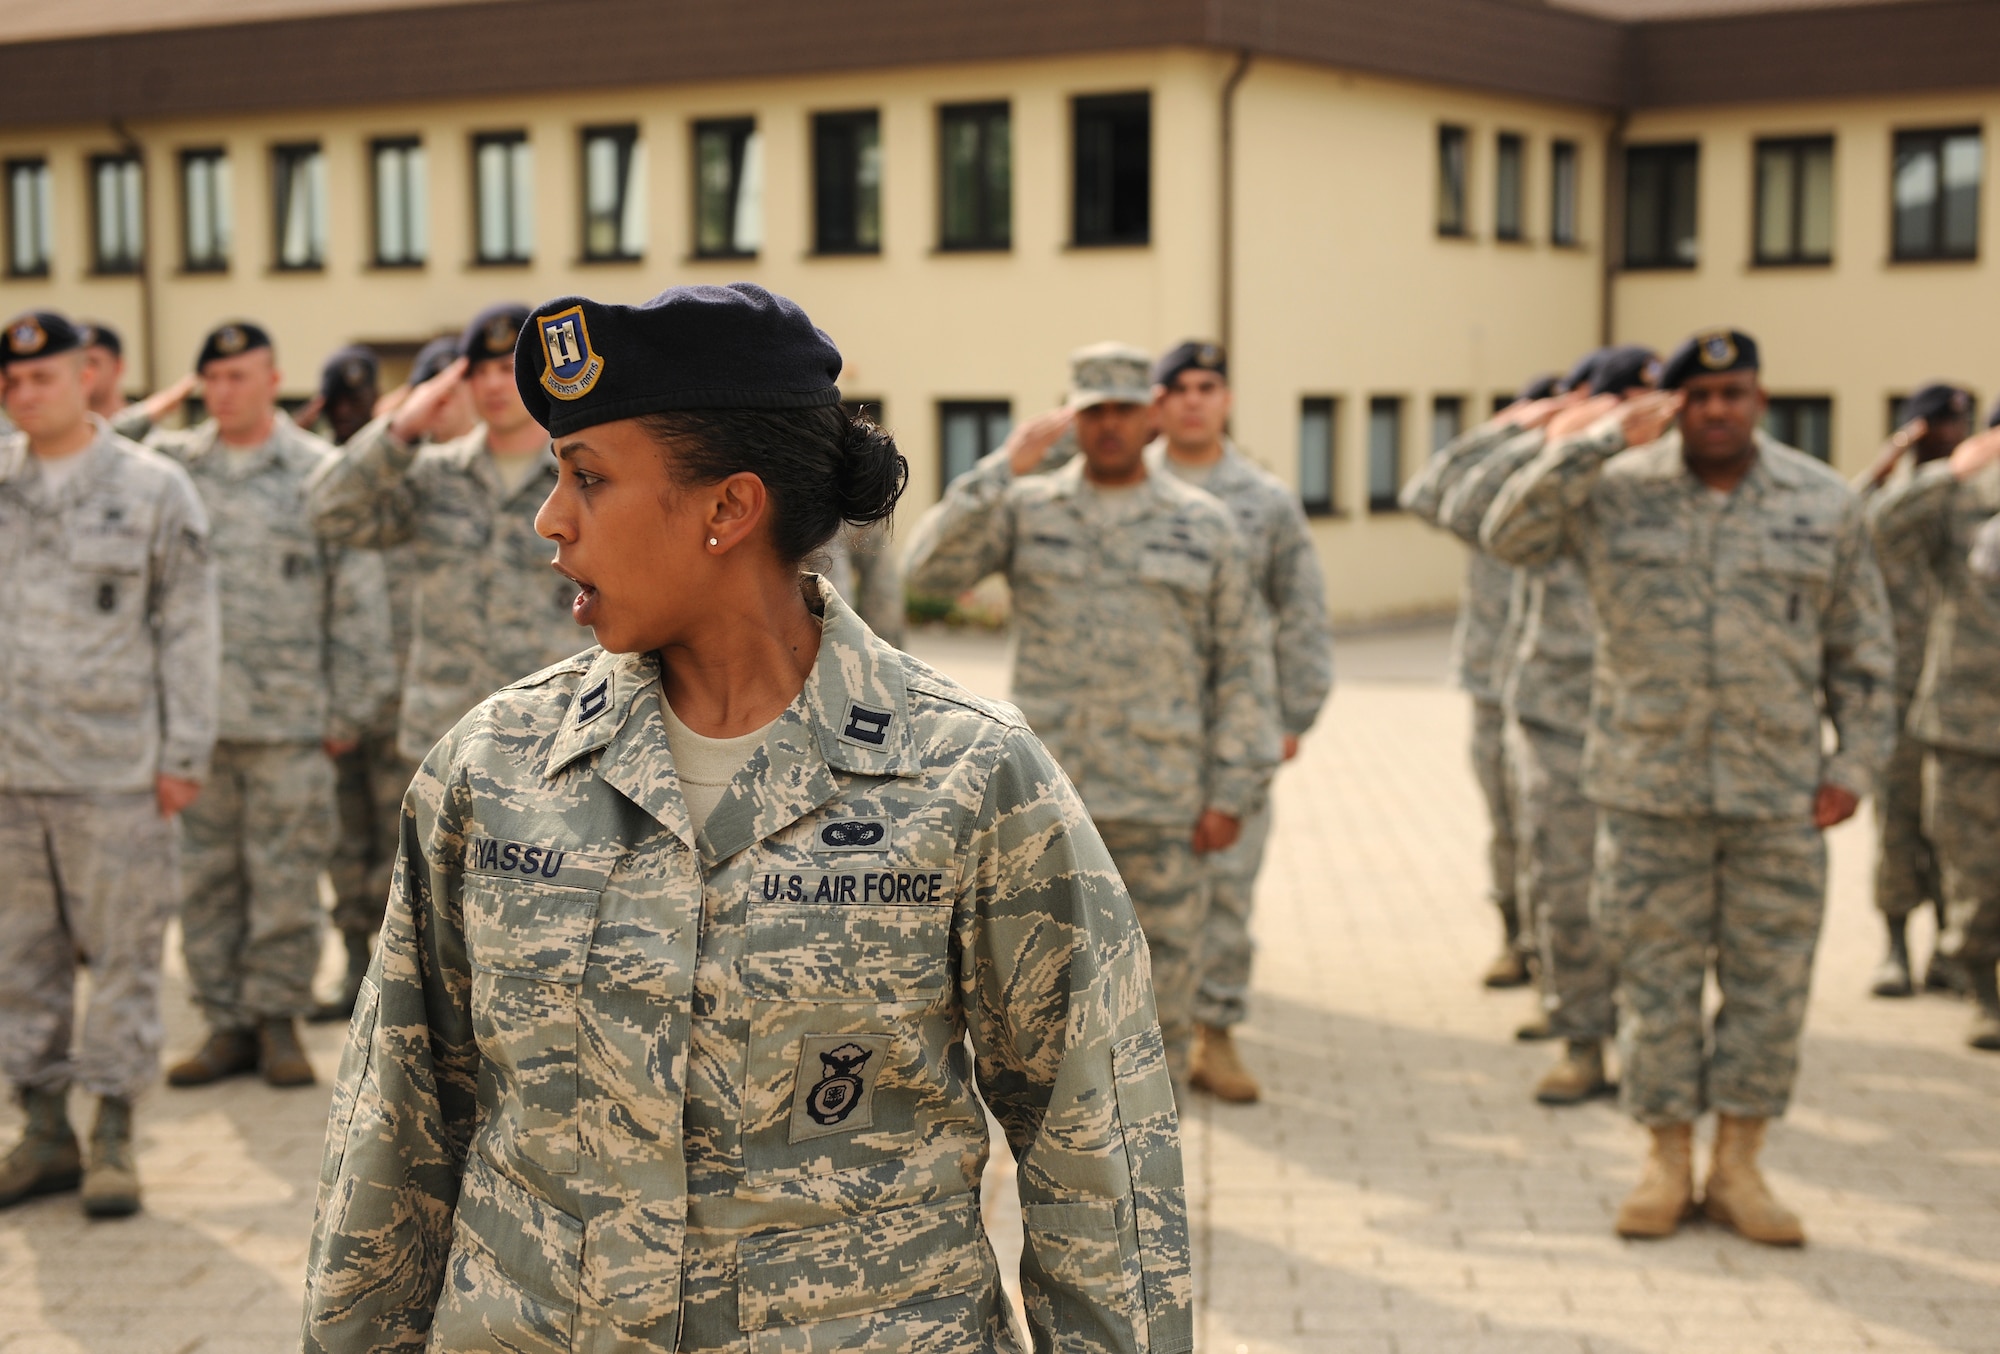 SPANGDAHLEM AIR BASE, Germany – Capt. Lidia Iyassu, 52nd Security Forces Squadron operations officer, commands her flight to order arms during a retreat ceremony here May 20. The retreat ceremony coincided with National Police Week, which honors law enforcement members who have lost their lives in the line of duty for the safety and protection of others. (U.S. Air Force photo/Senior Airman Nathanael Callon)